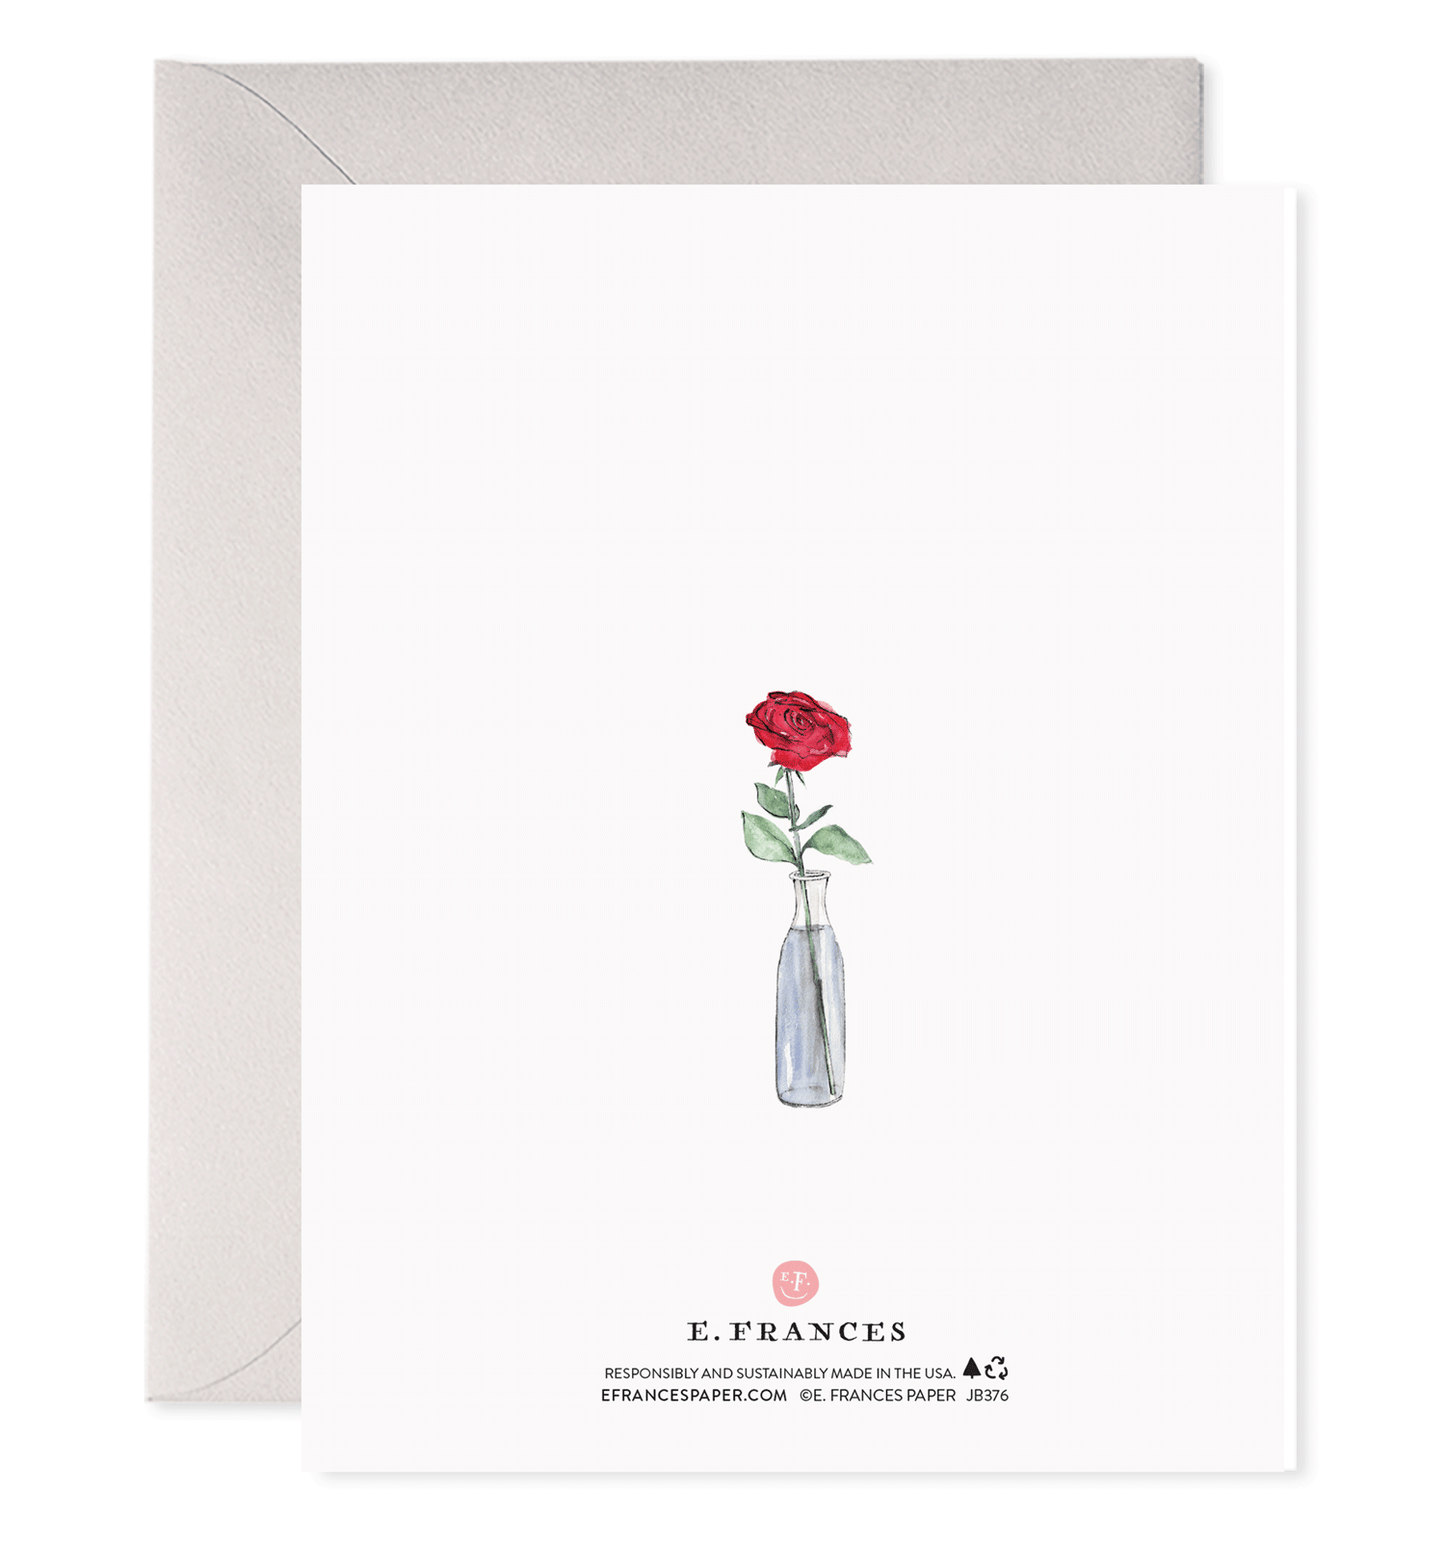 Red Balloon | Valentine's Day Greeting Card